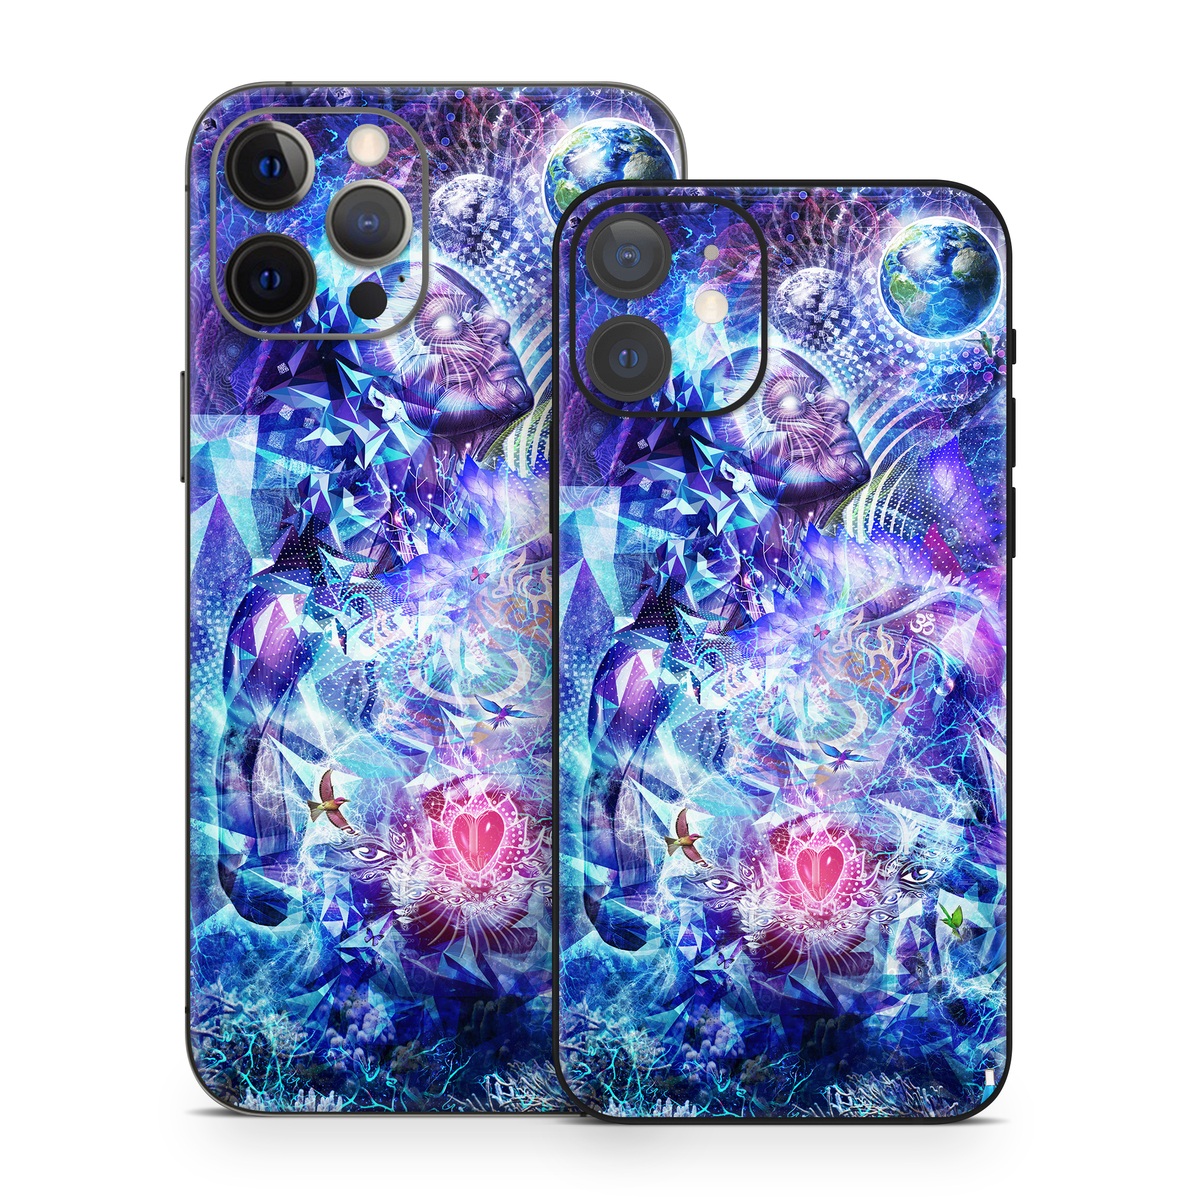 iPhone 12 Series Skin design of Blue, Purple, Violet, Lavender, Majorelle blue, Psychedelic art, Electric blue, Organism, Art, Design, with blue, green, purple, red, pink colors